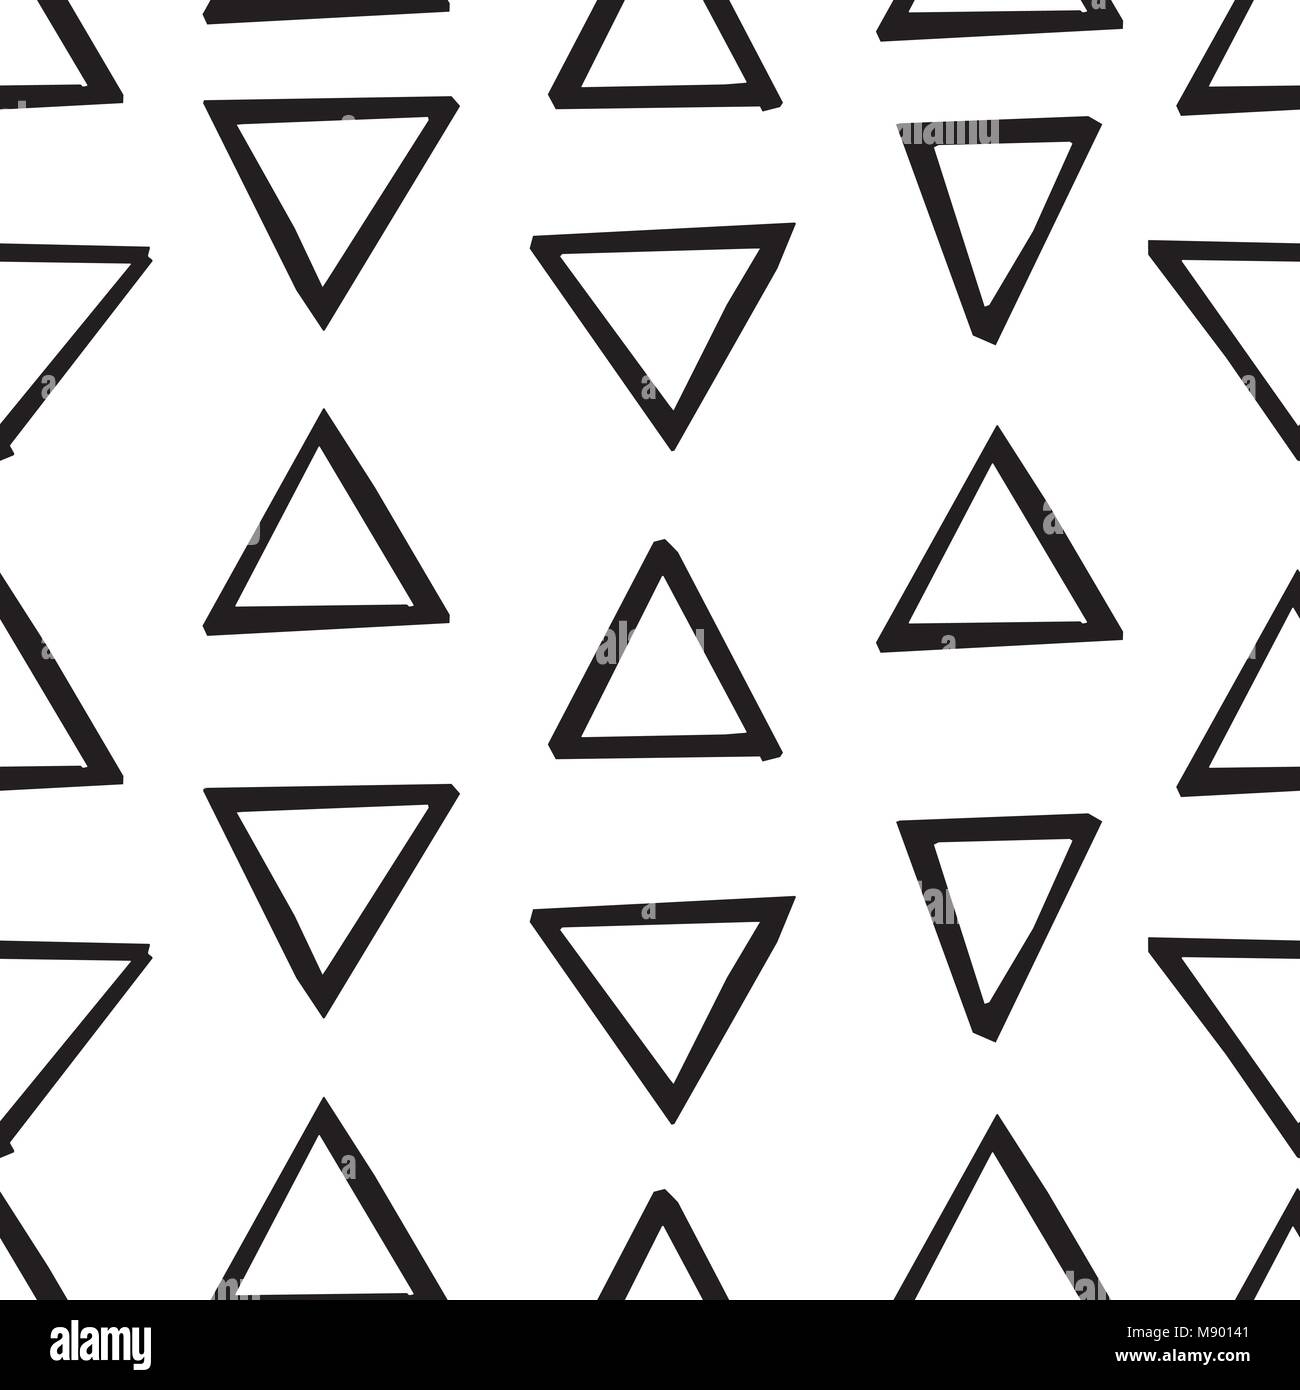 Seamless decorative pattern with hand drawn geometry shapes. Stock Vector